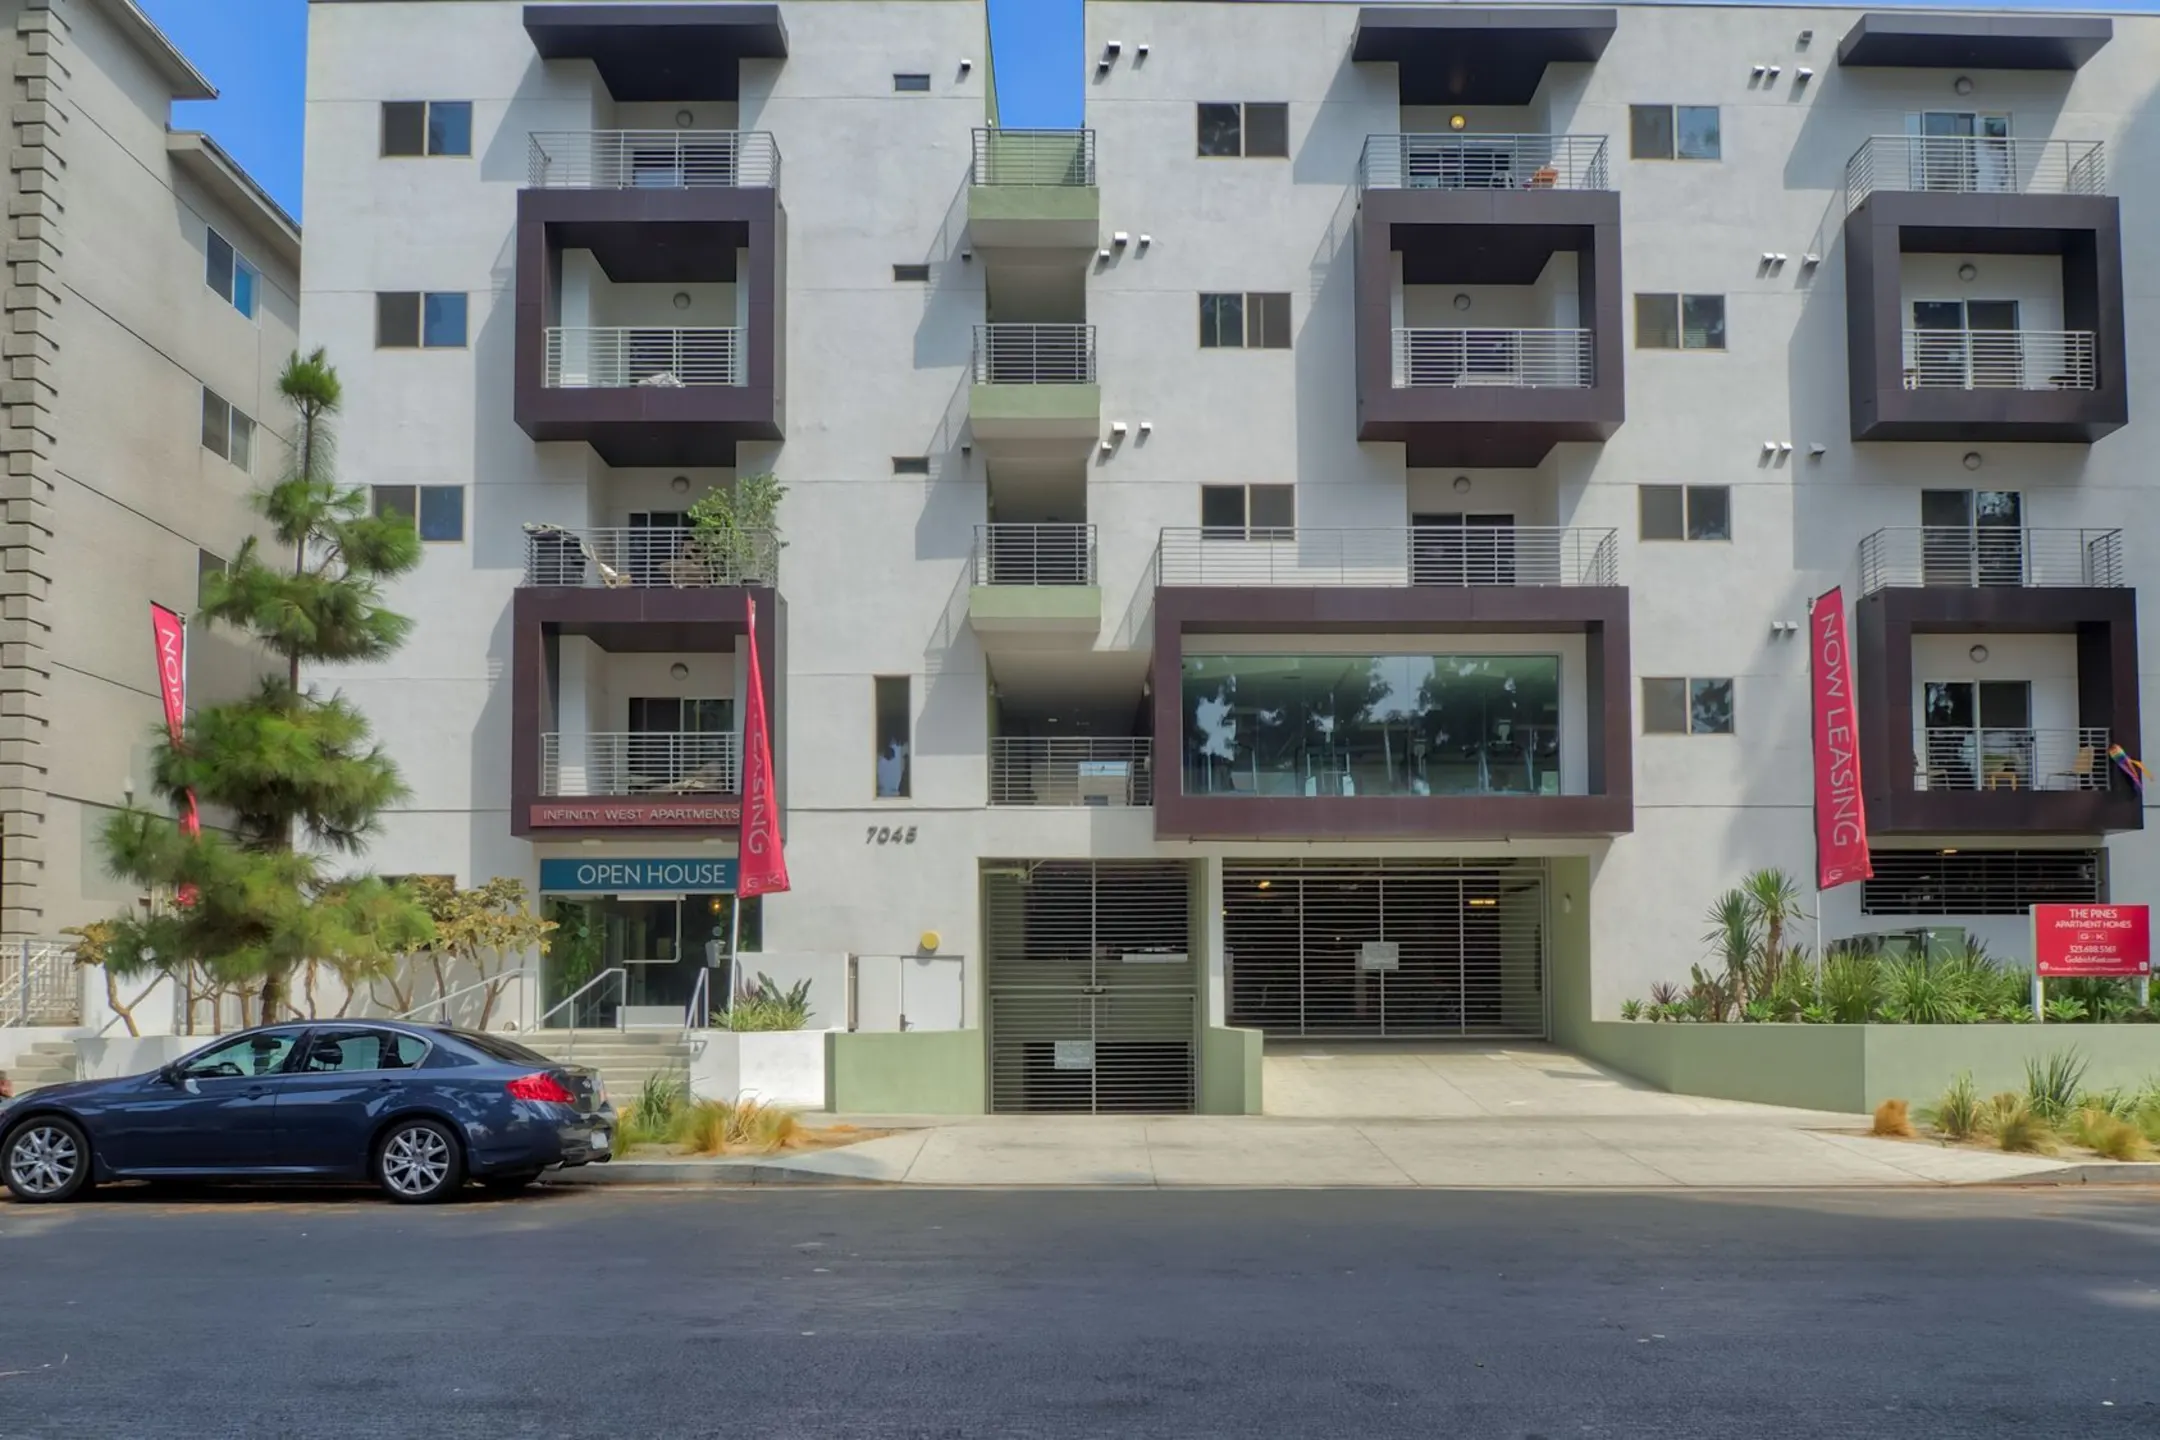 Building - The Pines Apartments - Los Angeles, CA